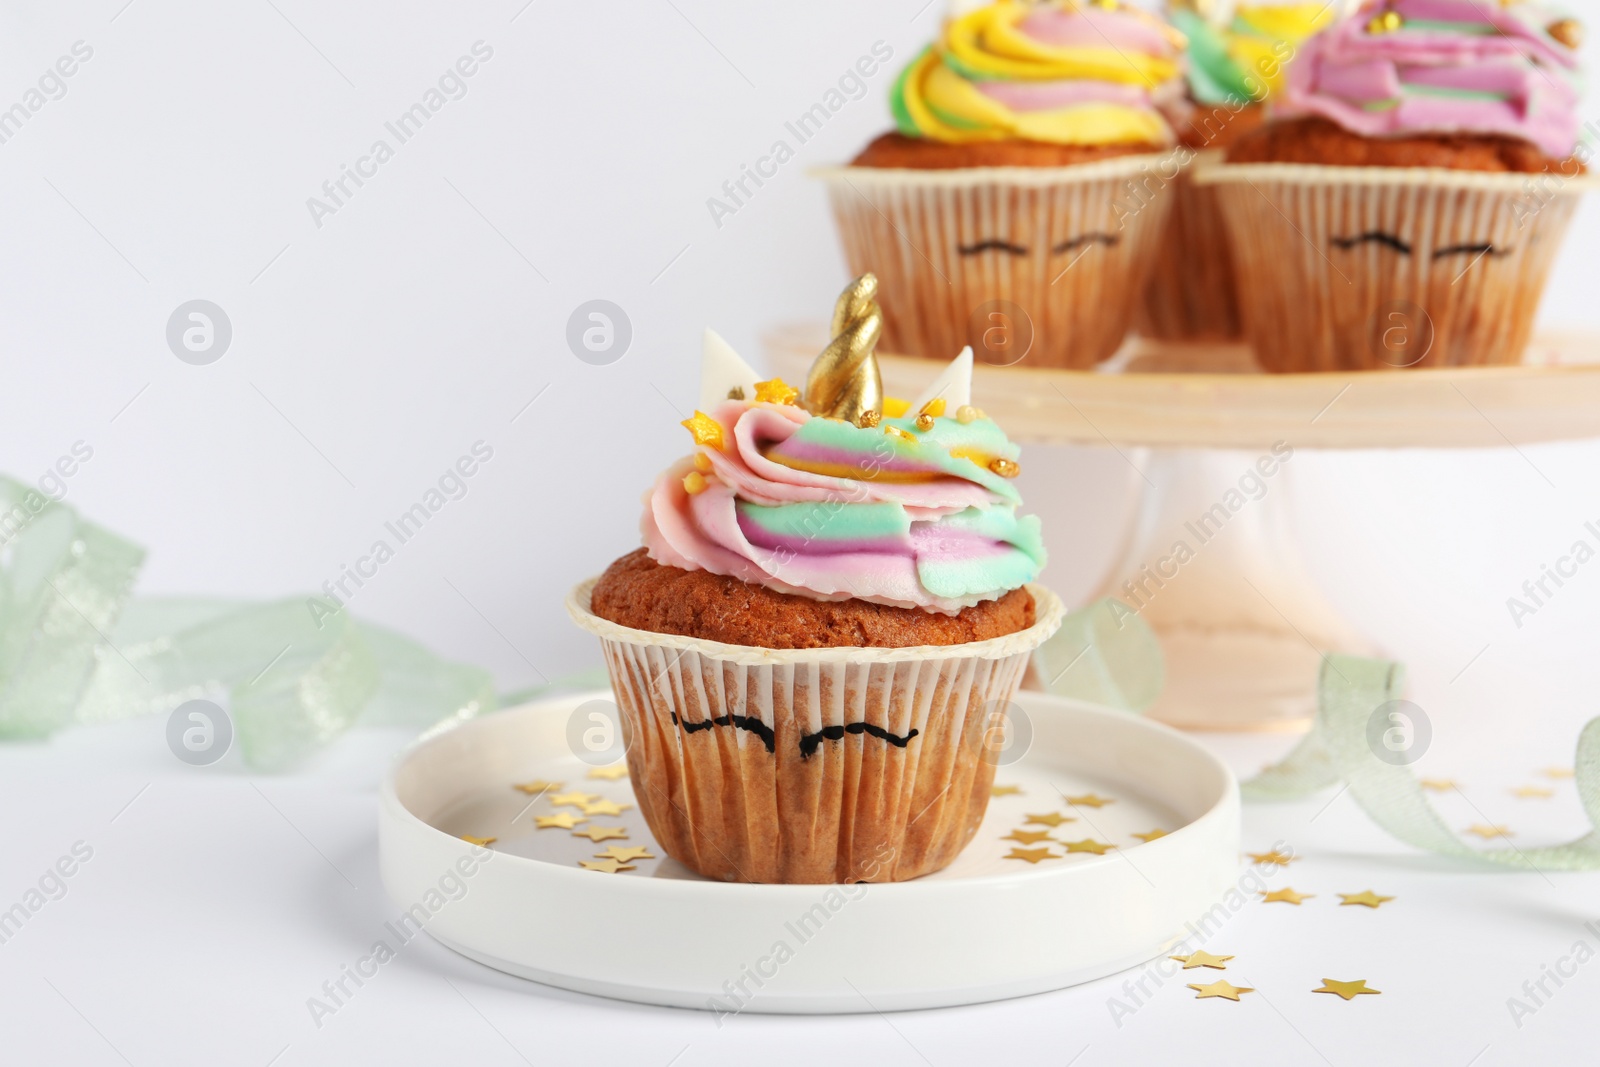 Photo of Cute sweet unicorn cupcakes on white table